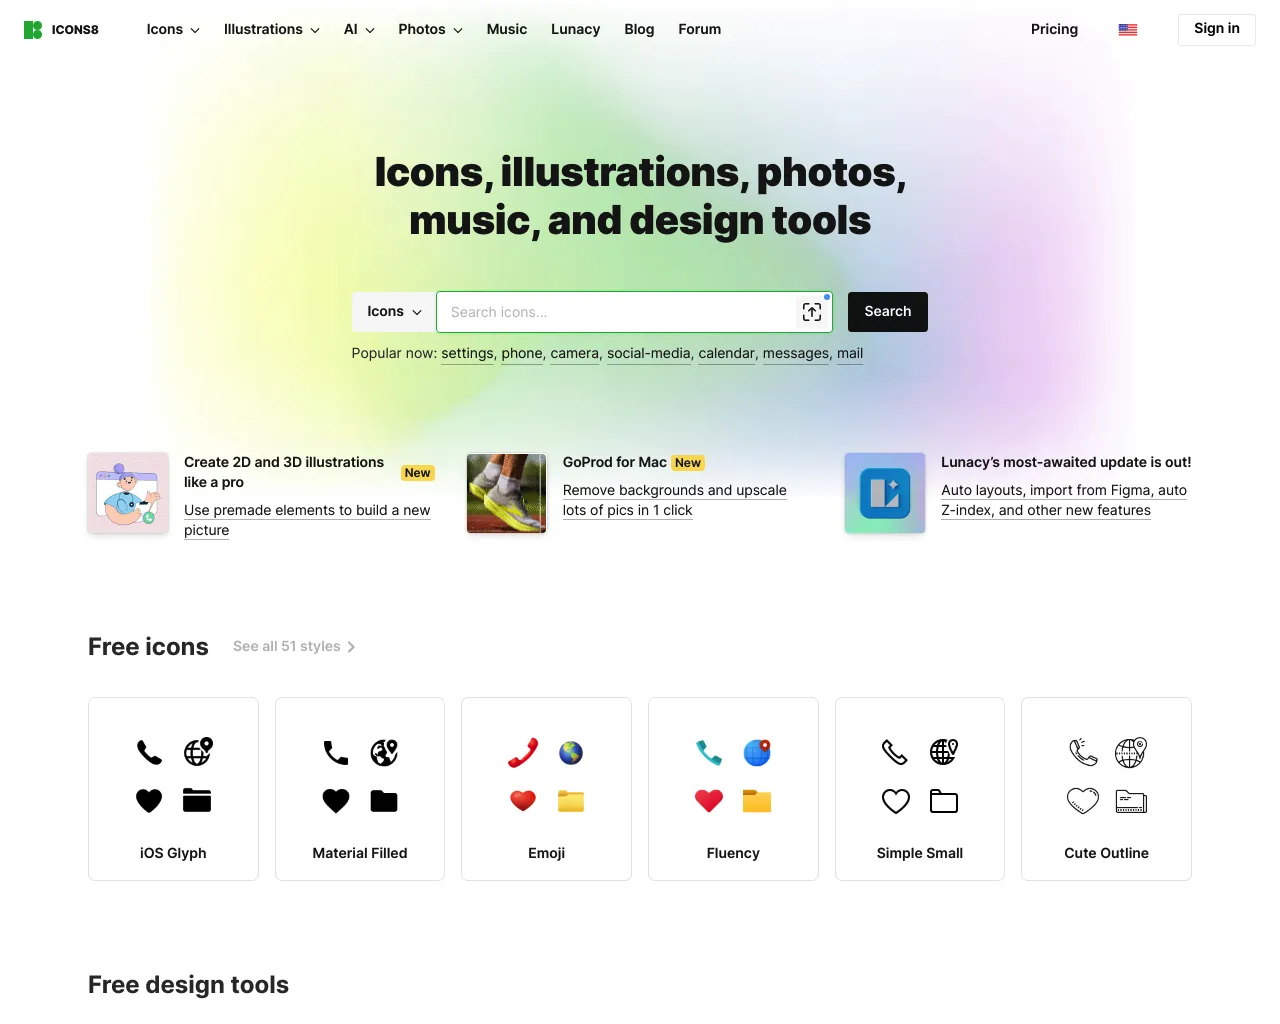 Icons, Illustrations, Photos, Music and Design Tools